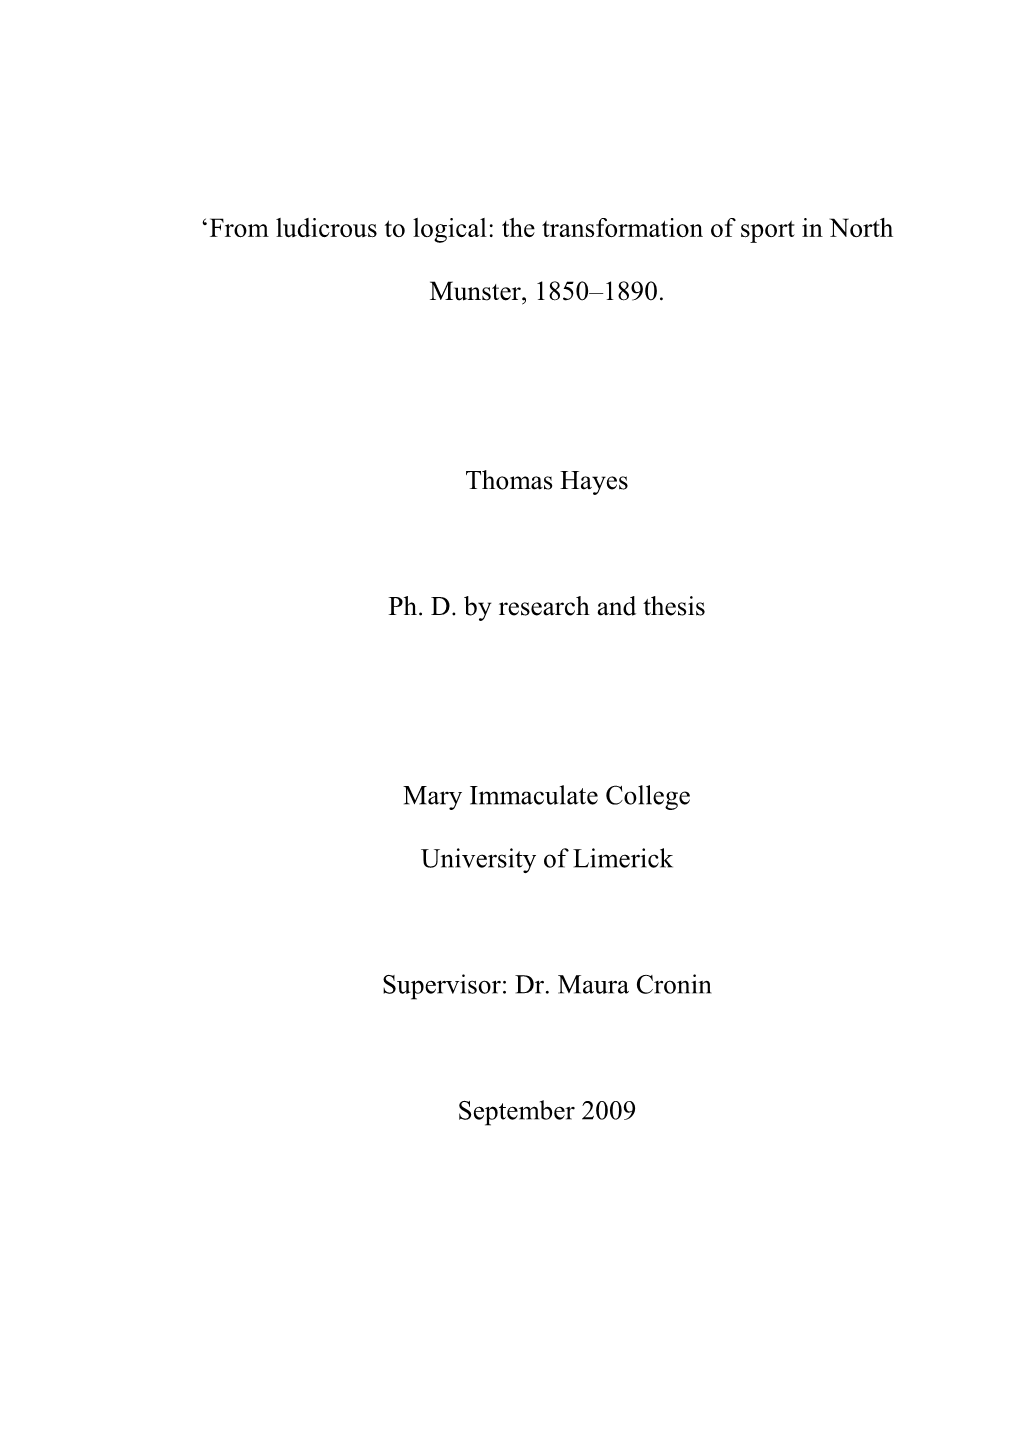 'From Ludicrous to Logical: the Transformation of Sport in North Munster, 1850–1890. Thomas Hayes Ph. D. by Research And